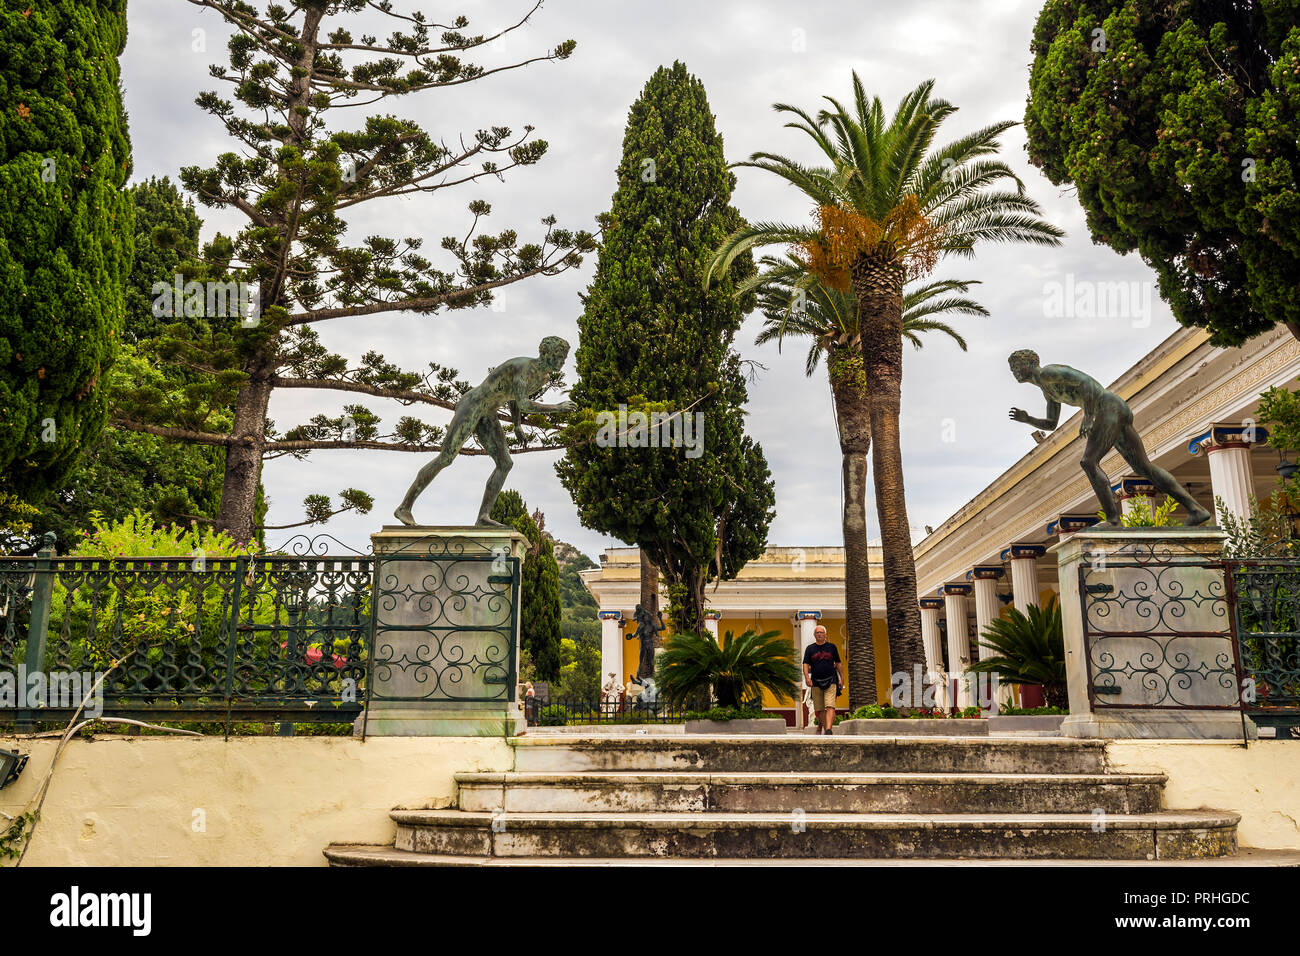 Achilleion palace, Corfu, Greece - August 24, 2018: Two bronze runners on Achilleion palace of princess Sissy in Corfu, Greece Stock Photo